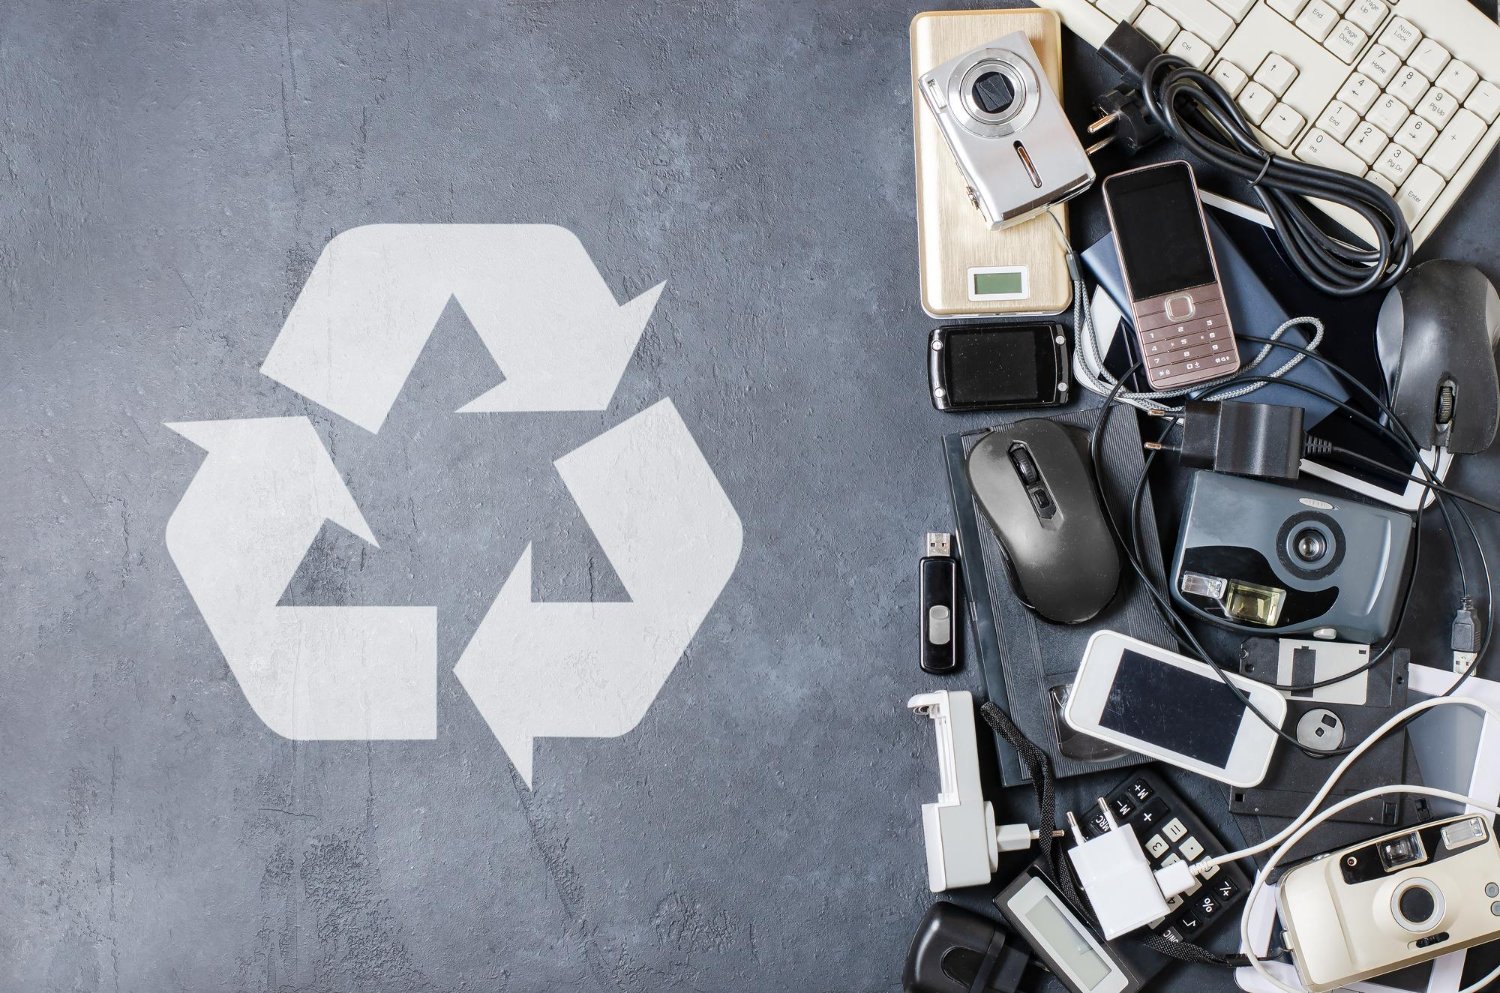 What are Top 10 issues in proper disposal of electronic waste globally?